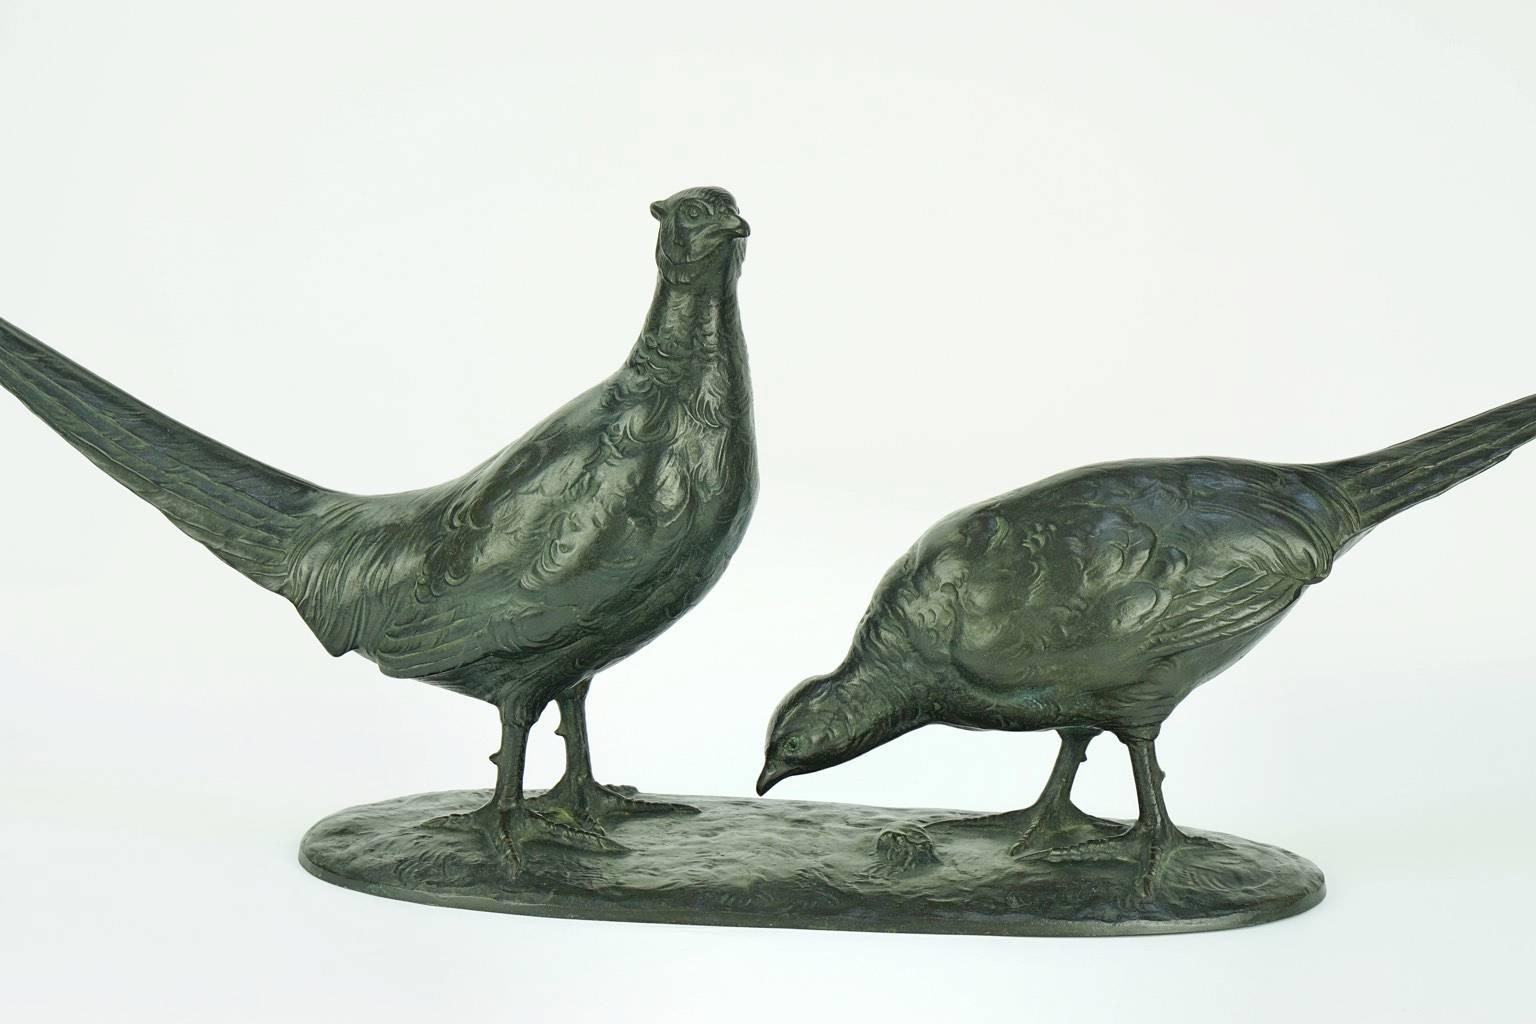 Two pheasants in courtship by Otto Poertzel (1876-1963).
Signature/marks: Prof. Poertzel. “Krass, Berlin” inscribed and foundry mark.

Very good condition.

Otto Poertzel is most famous for his chryselephantine figures. 

 
 